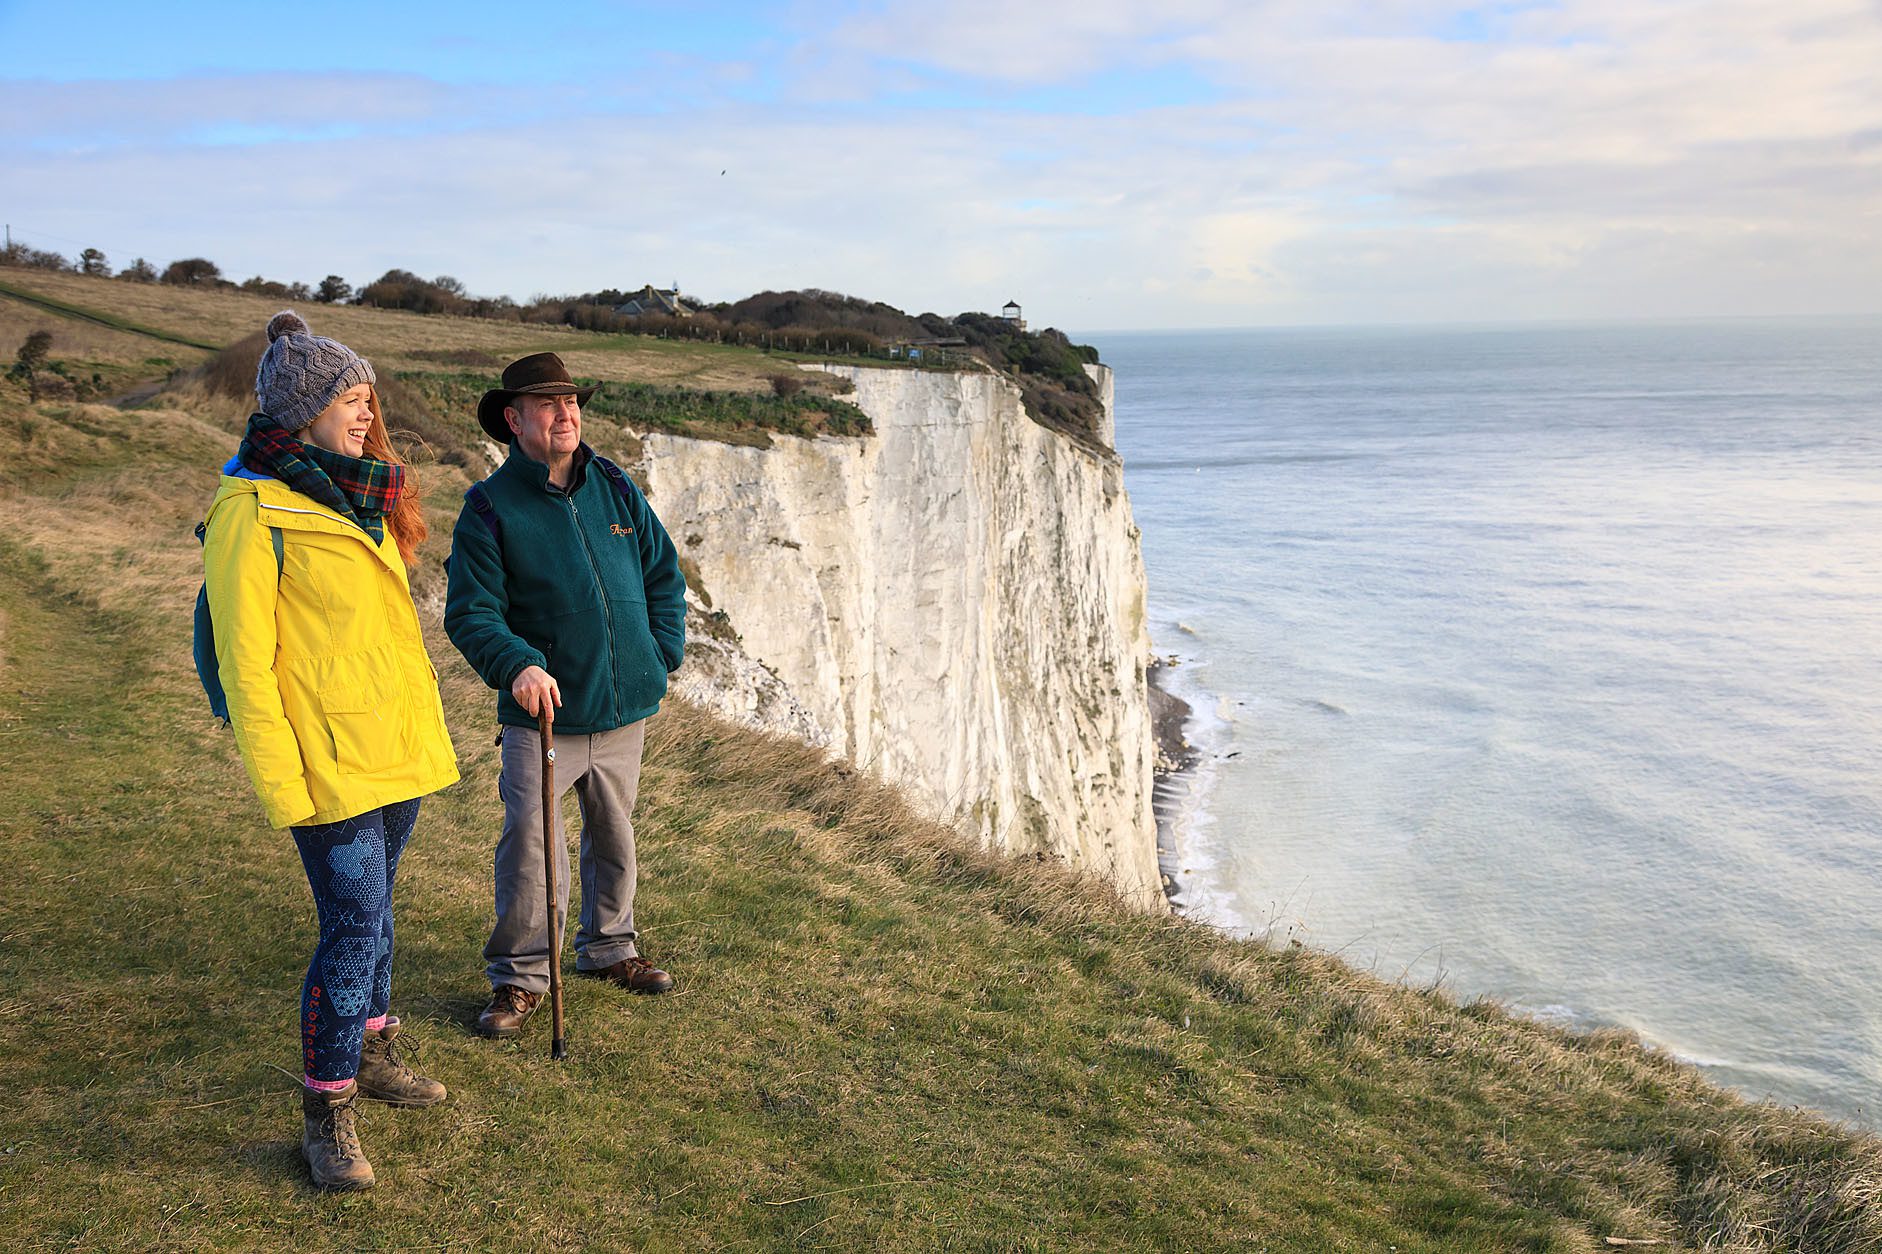 Two people standing at cliff edge looking out at the sea